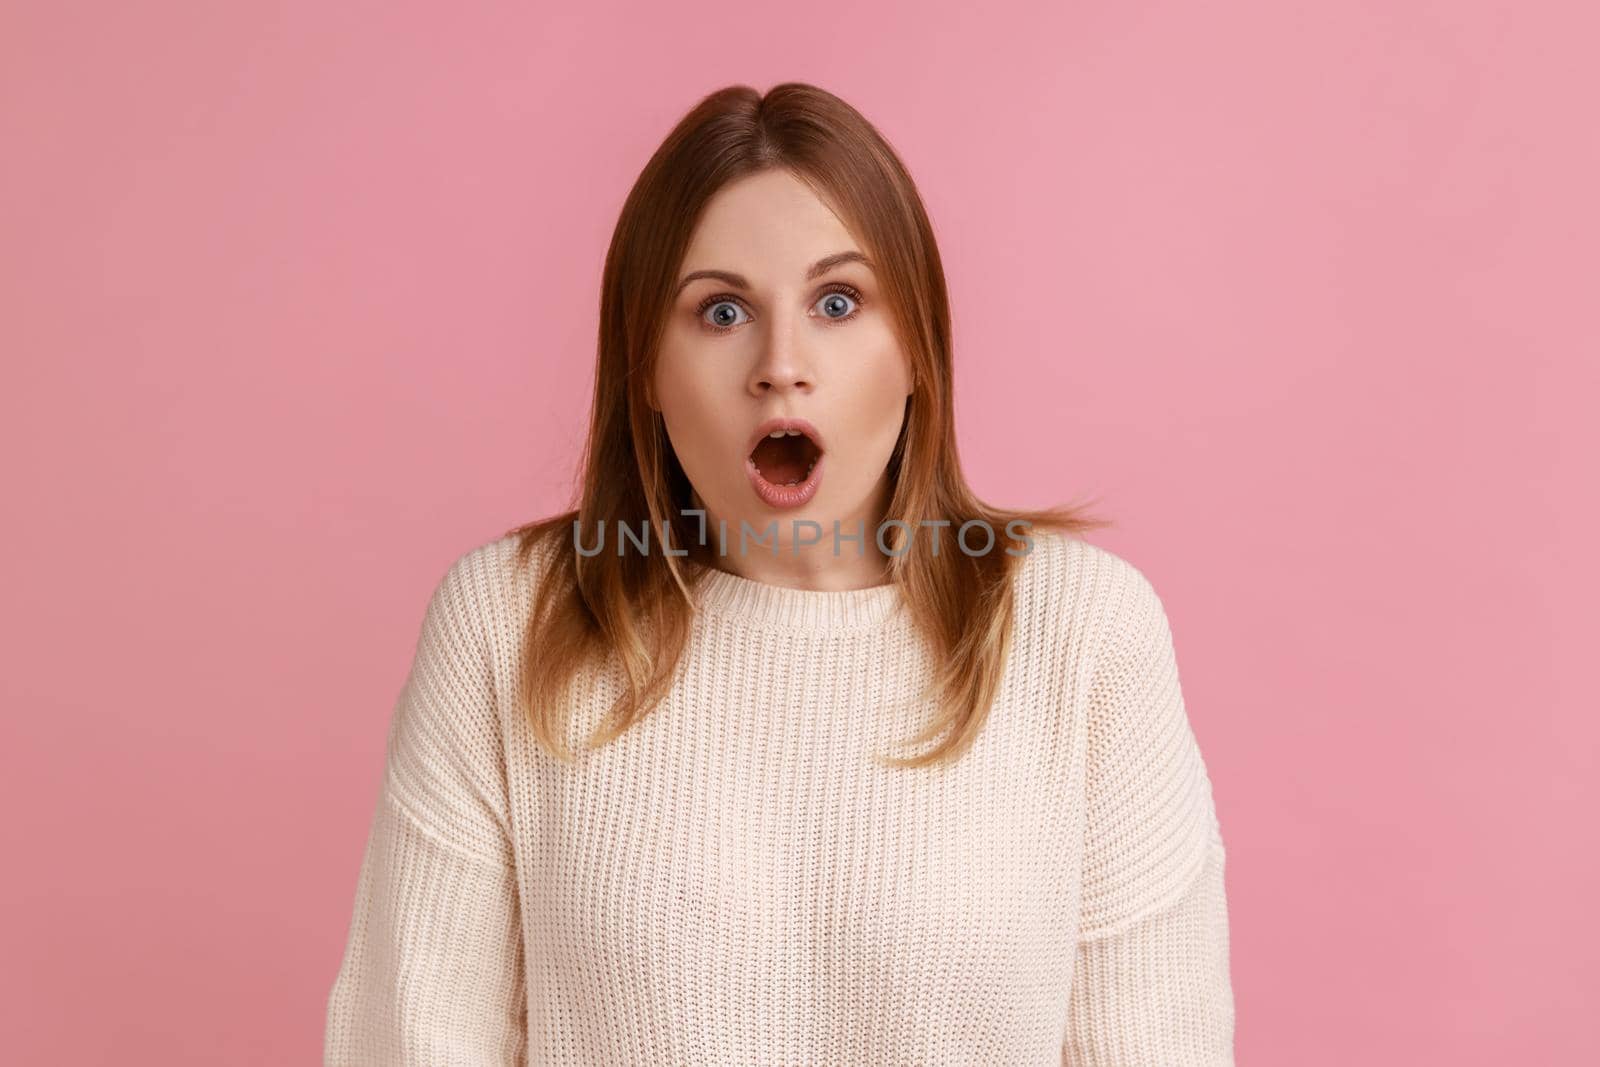 Portrait of shocked blond woman standing looking at camera with open mouth, being astonished by breaking news, wearing white sweater. Indoor studio shot isolated on pink background.